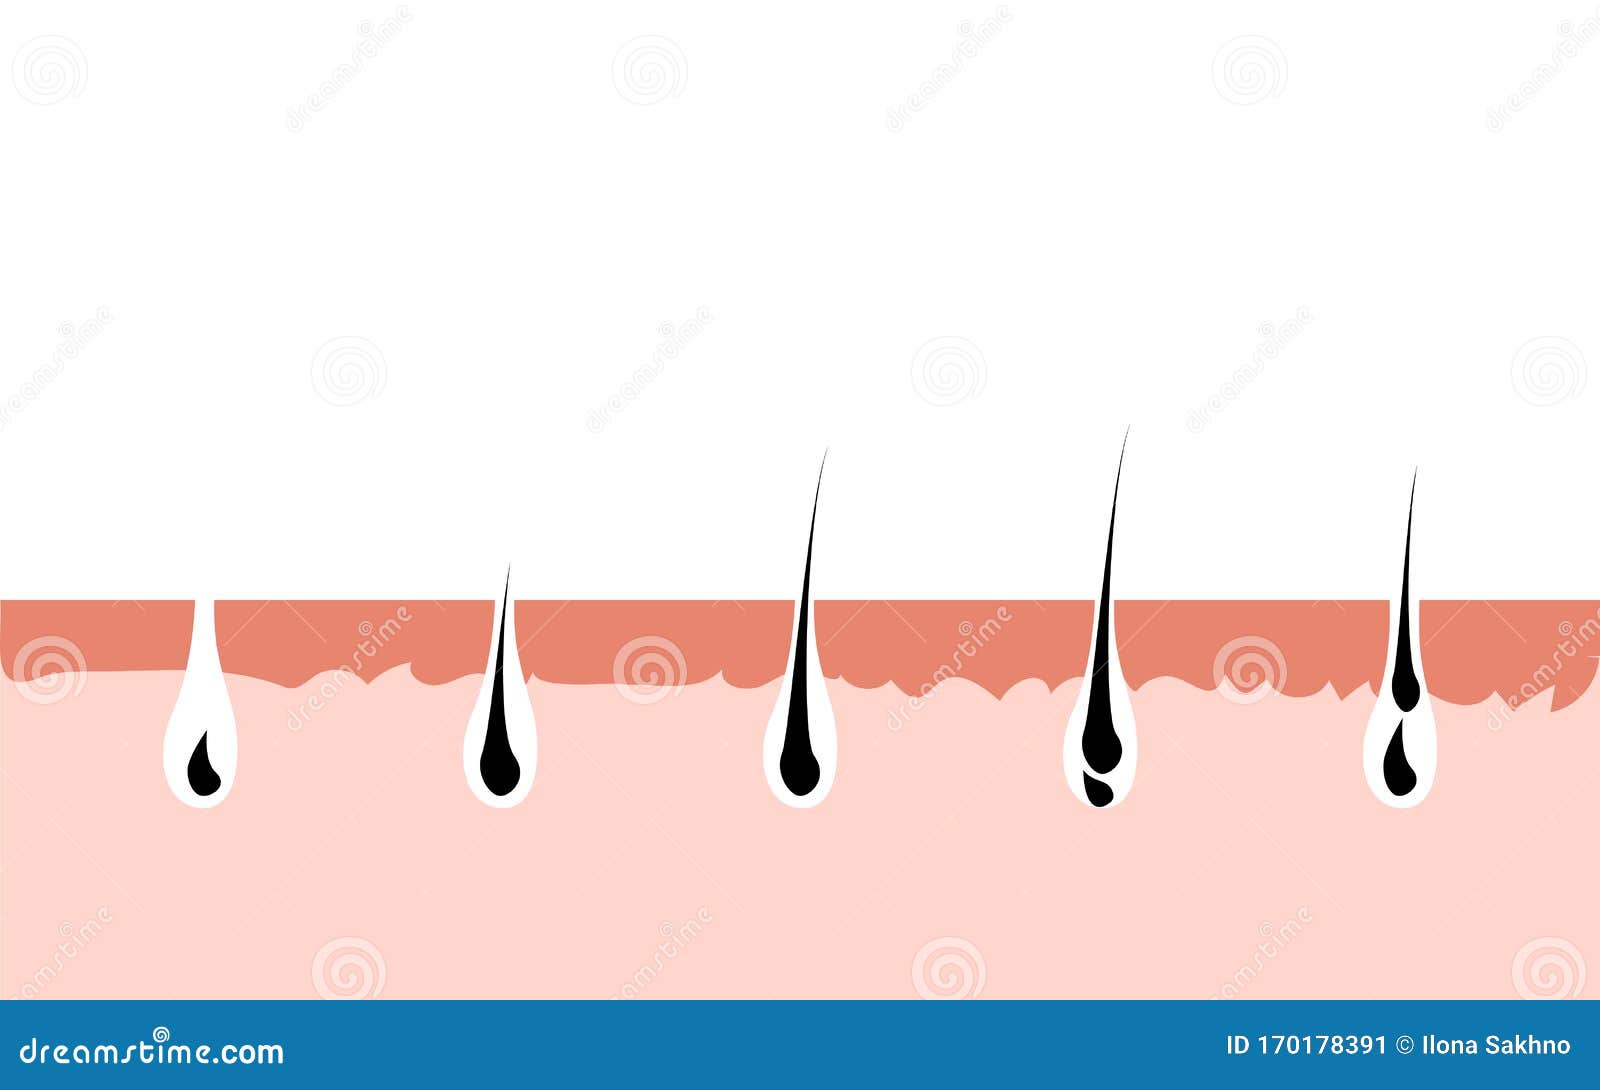 Hair Growth Cycle Skin. Follicle Anatomy Anagen Phase, Hair Growth Diagram  Illustration Stock Vector - Illustration of hormone, loss: 170178391